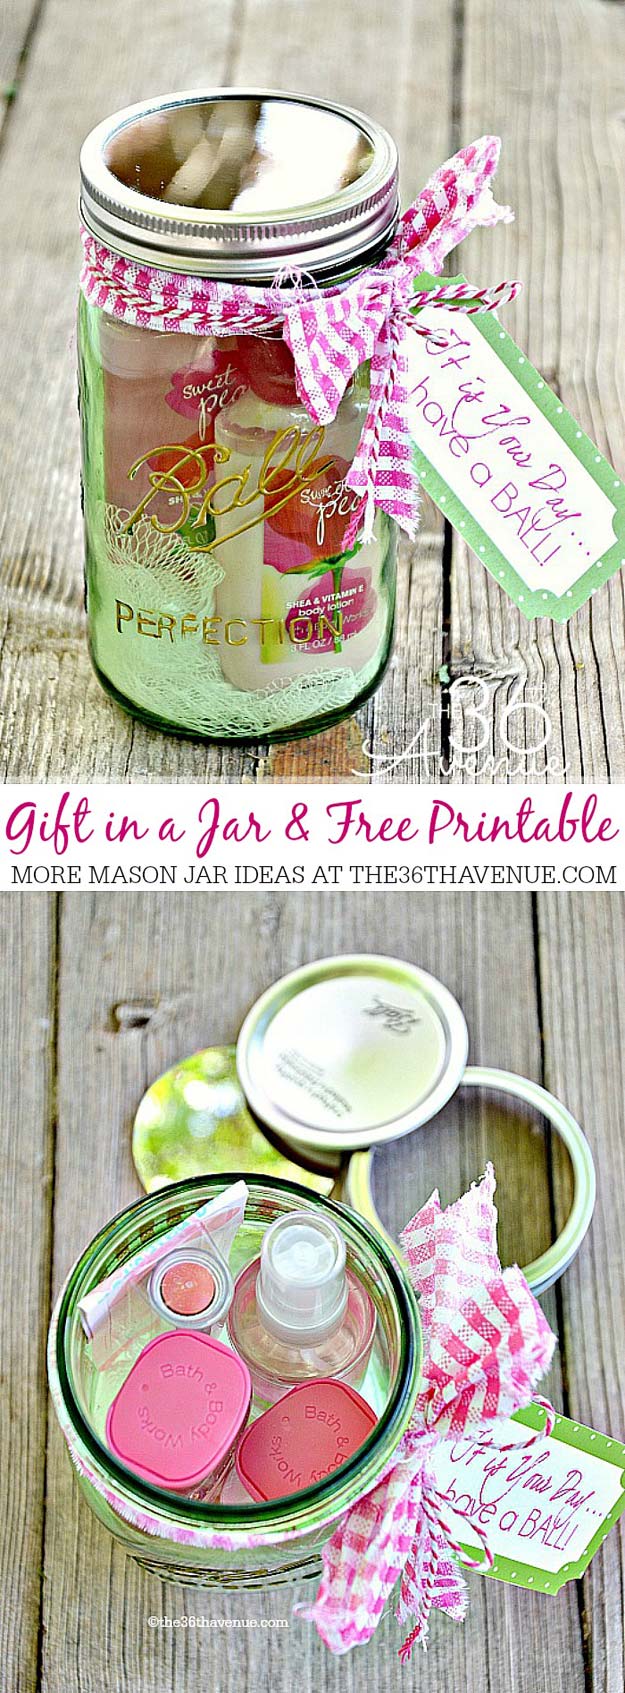 Cute DIY Mason Jar Gift Ideas for Teens - DIY Jar Gift - Best Christmas Presents, Birthday Gifts and Cool Room Decor Ideas for Girls and Boy Teenagers - Fun Crafts and DIY Projects for Snow Globes, Dollar Store Crafts and Valentines for Kids